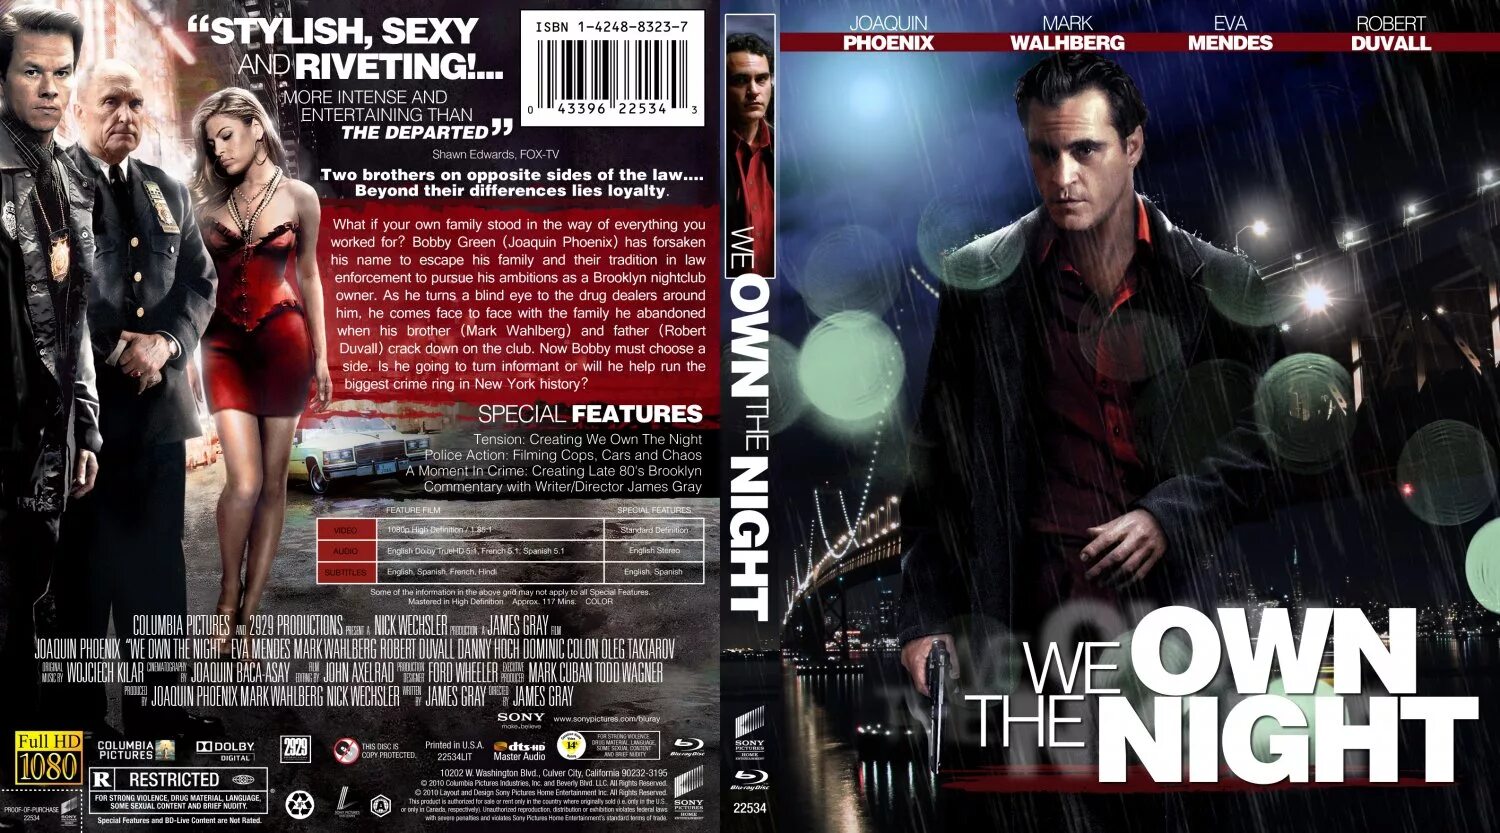 He comes in the night. We own the Night (2007) Cover. We own the Night 2007 DVD Cover. Poster we own the Night. 2011 - Own the Night.